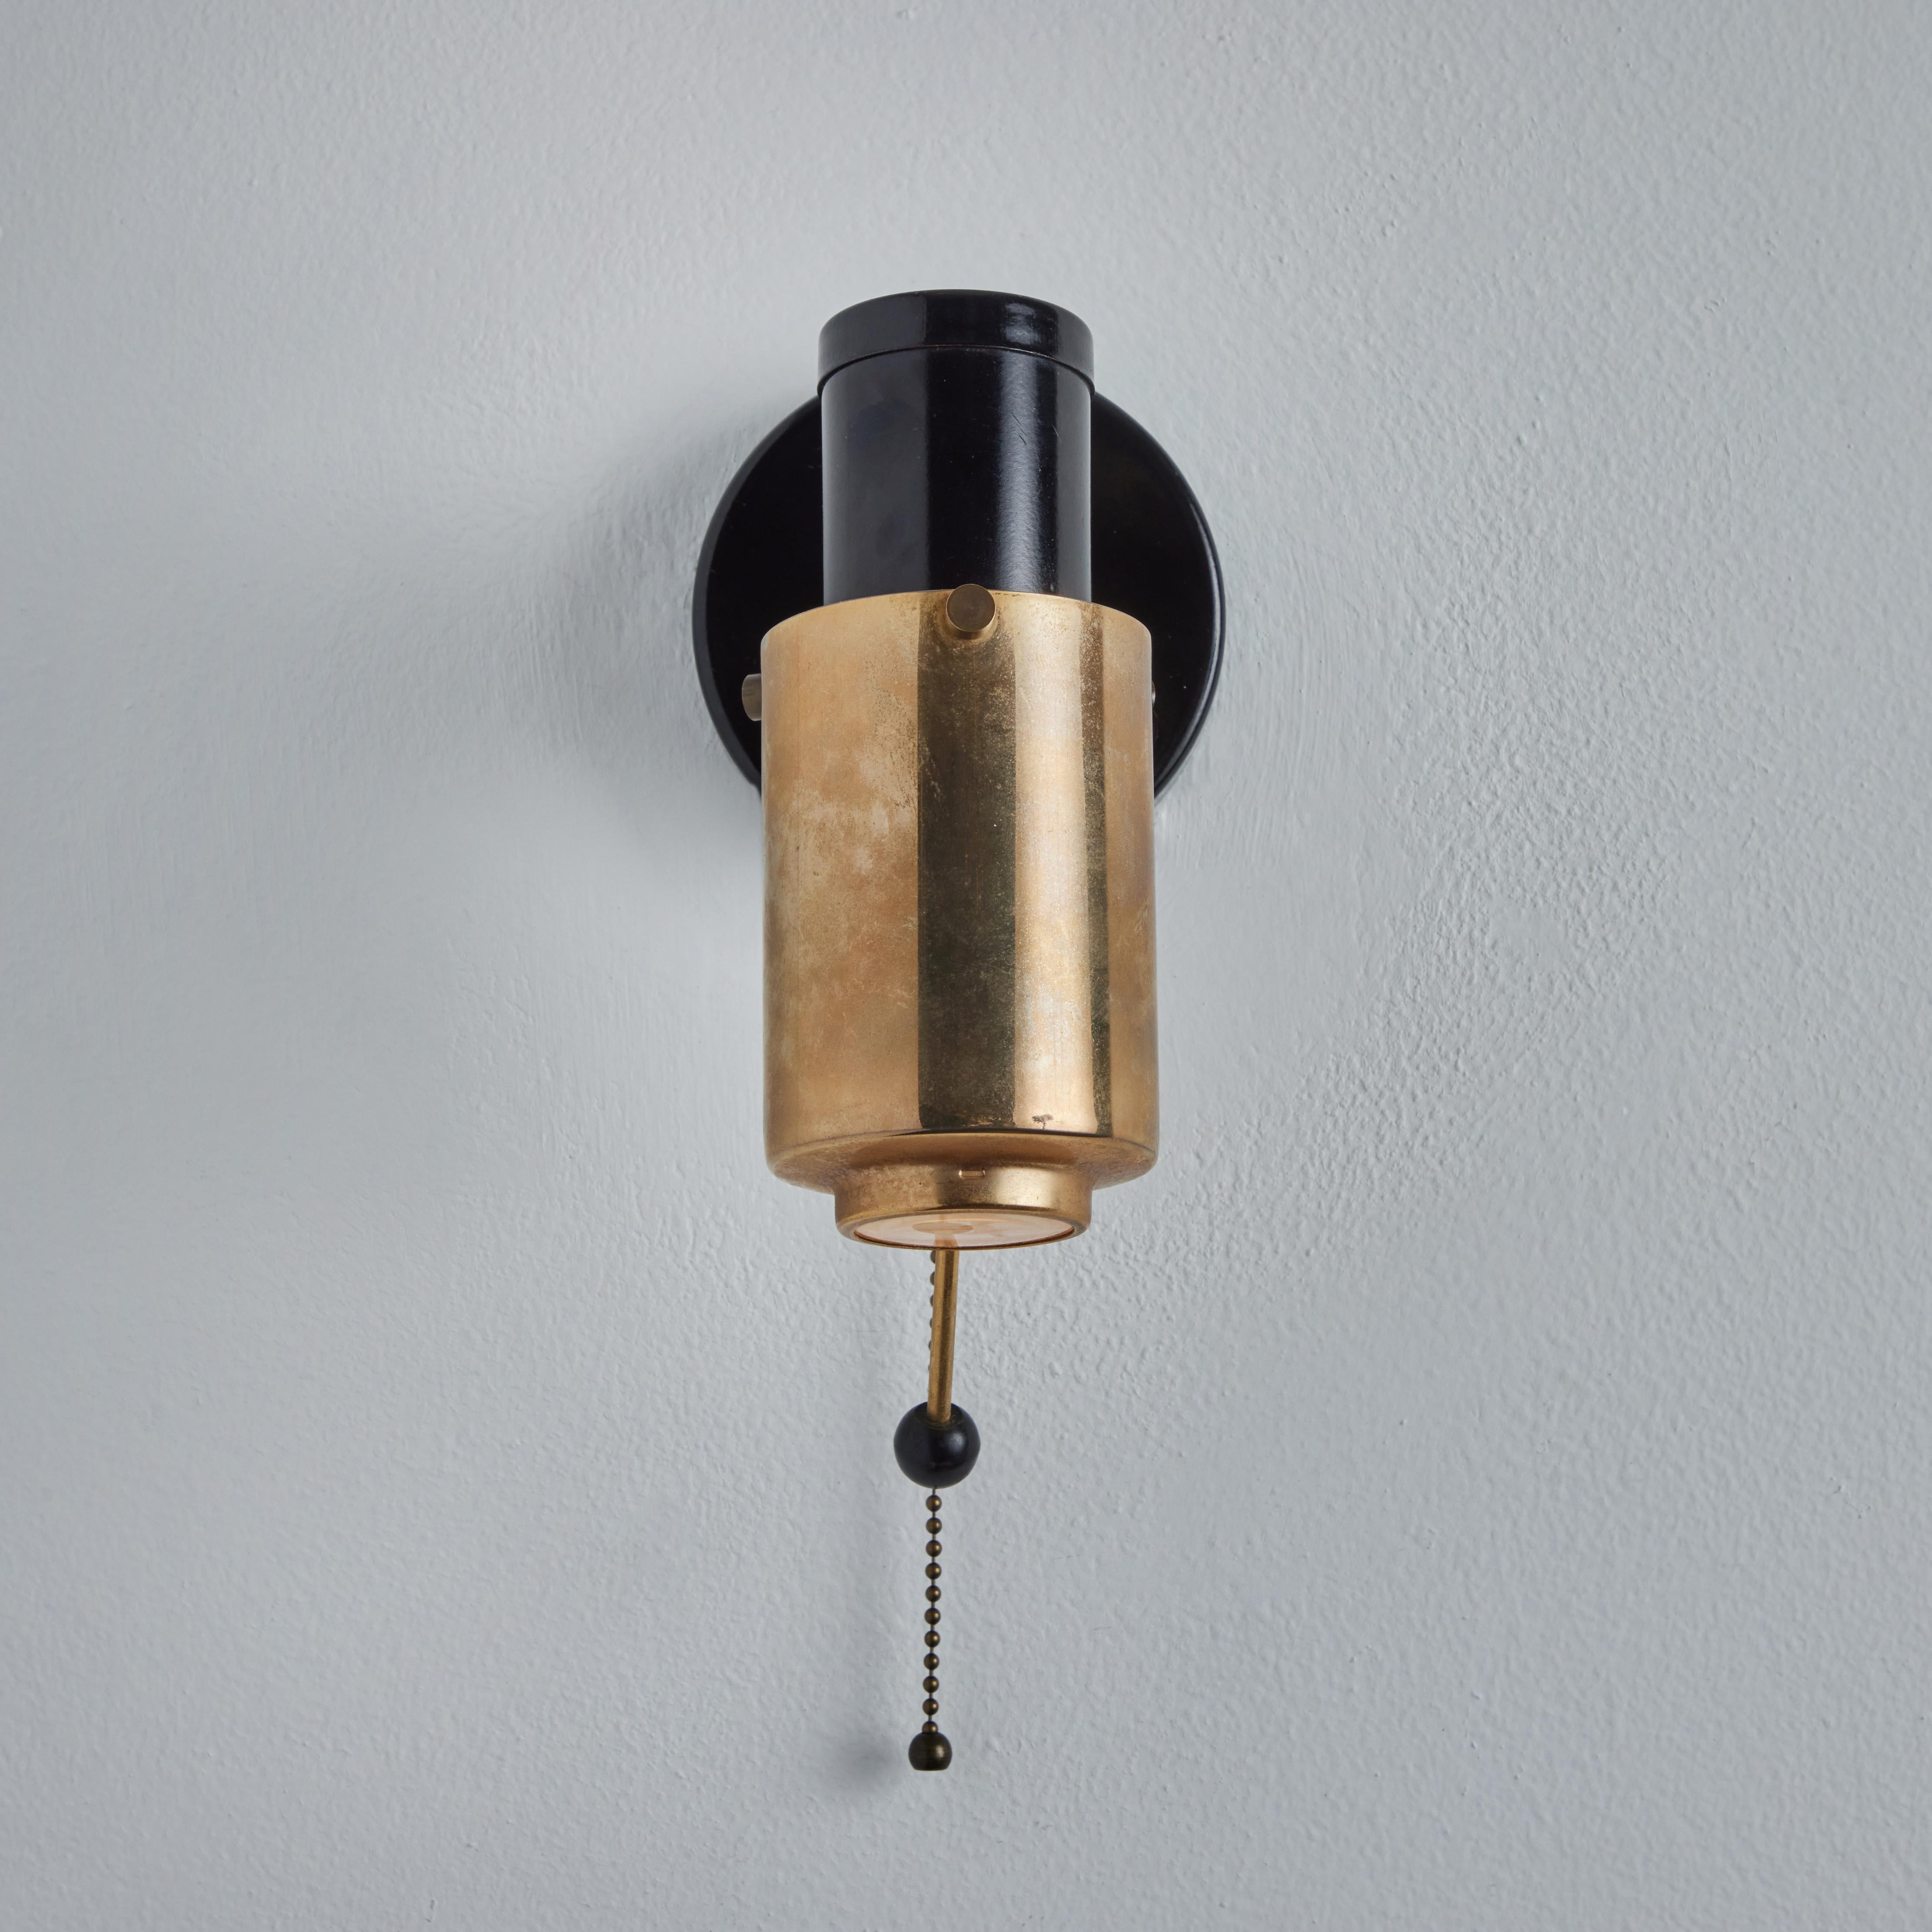 Pair of 1950s Jacques Biny black and brass 'Zodiac' wall lights for Lita. Executed in black painted metal, glass and brass for Lita, France. Retain original on/off pulls with cord. Professionally rewired for US electrical.

Price is for the